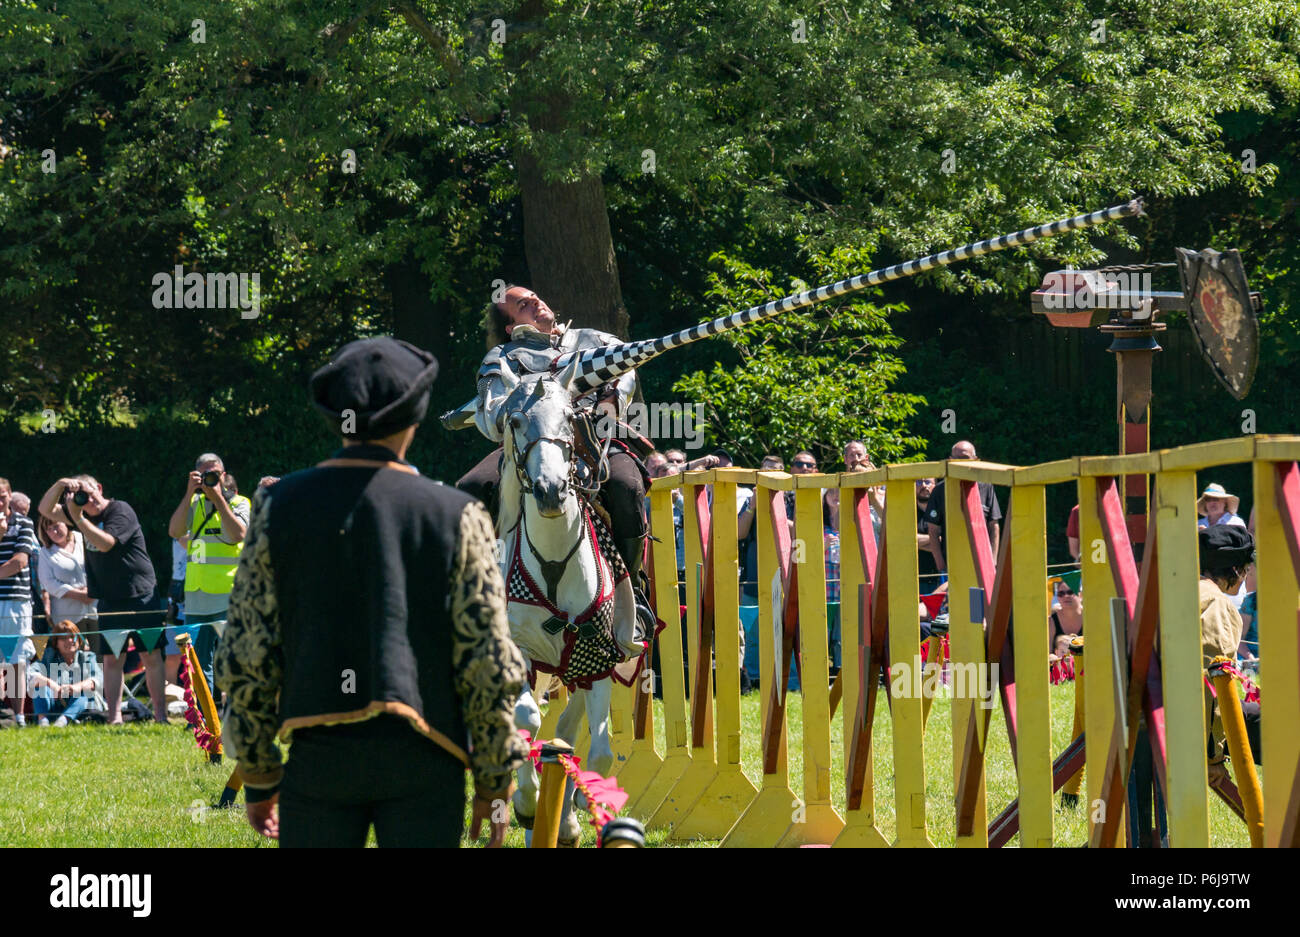 Jousting and Medieval Fair at Linlithgow Palace, Linlithgow, Scotland, United Kingdom, 30th June 2018. Historic Environment Scotland kick off their summer entertainment programme with a fabulous display of Medieval jousting in the grounds of the historic castle. The jousting is performed by Les Amis D'Onno equine stunt team. A performer riding a white horse with a lance Stock Photo